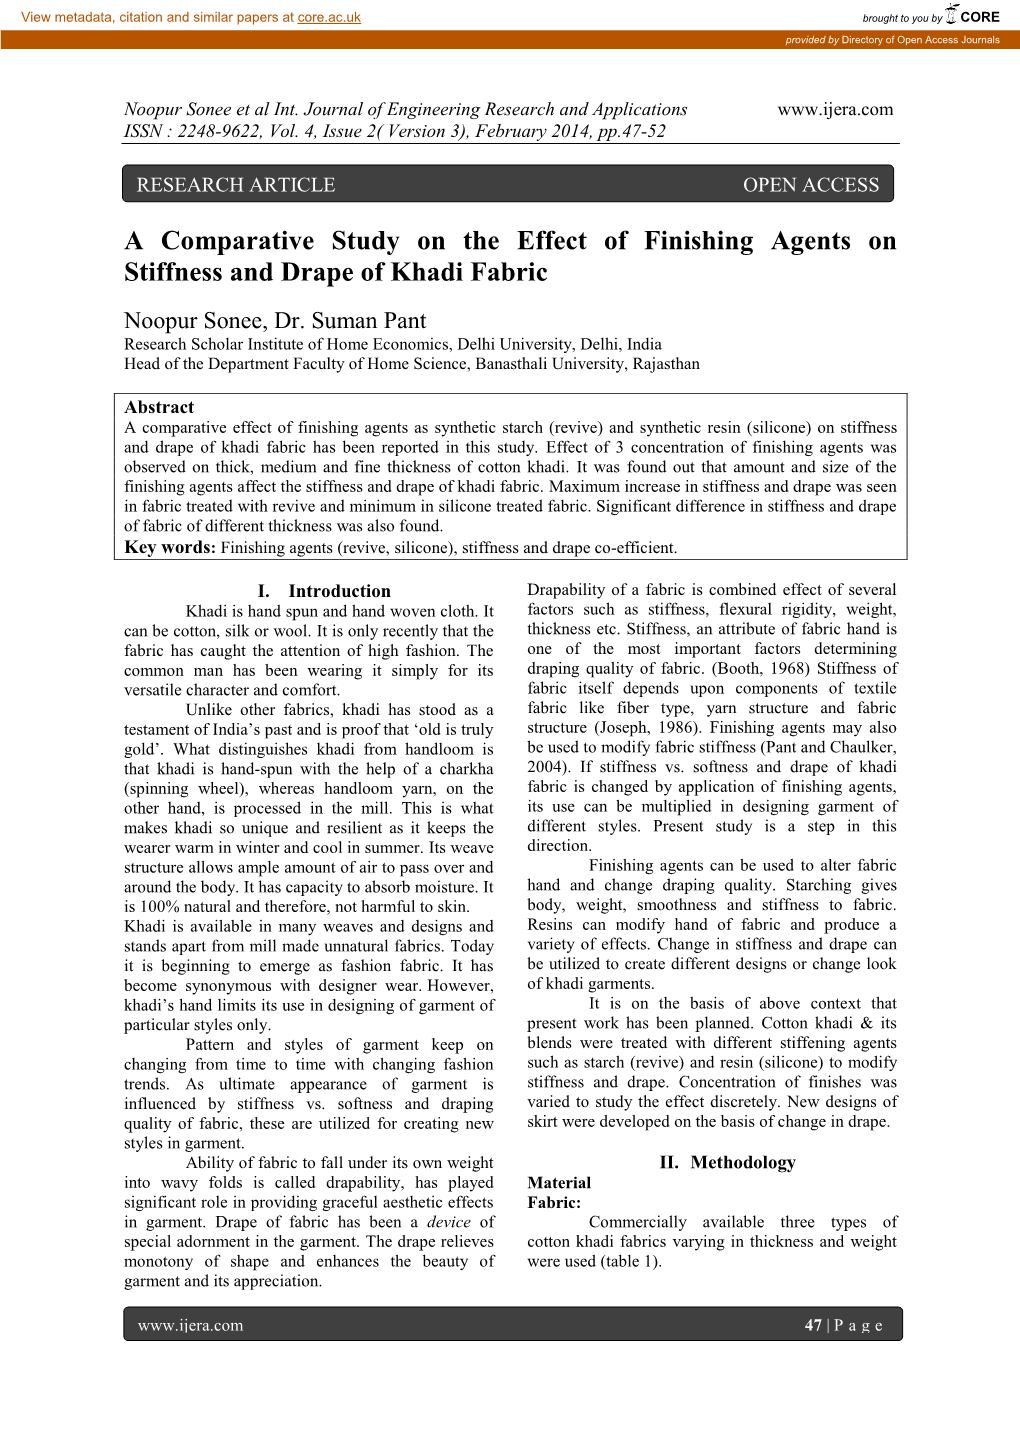 A Comparative Study on the Effect of Finishing Agents on Stiffness and Drape of Khadi Fabric